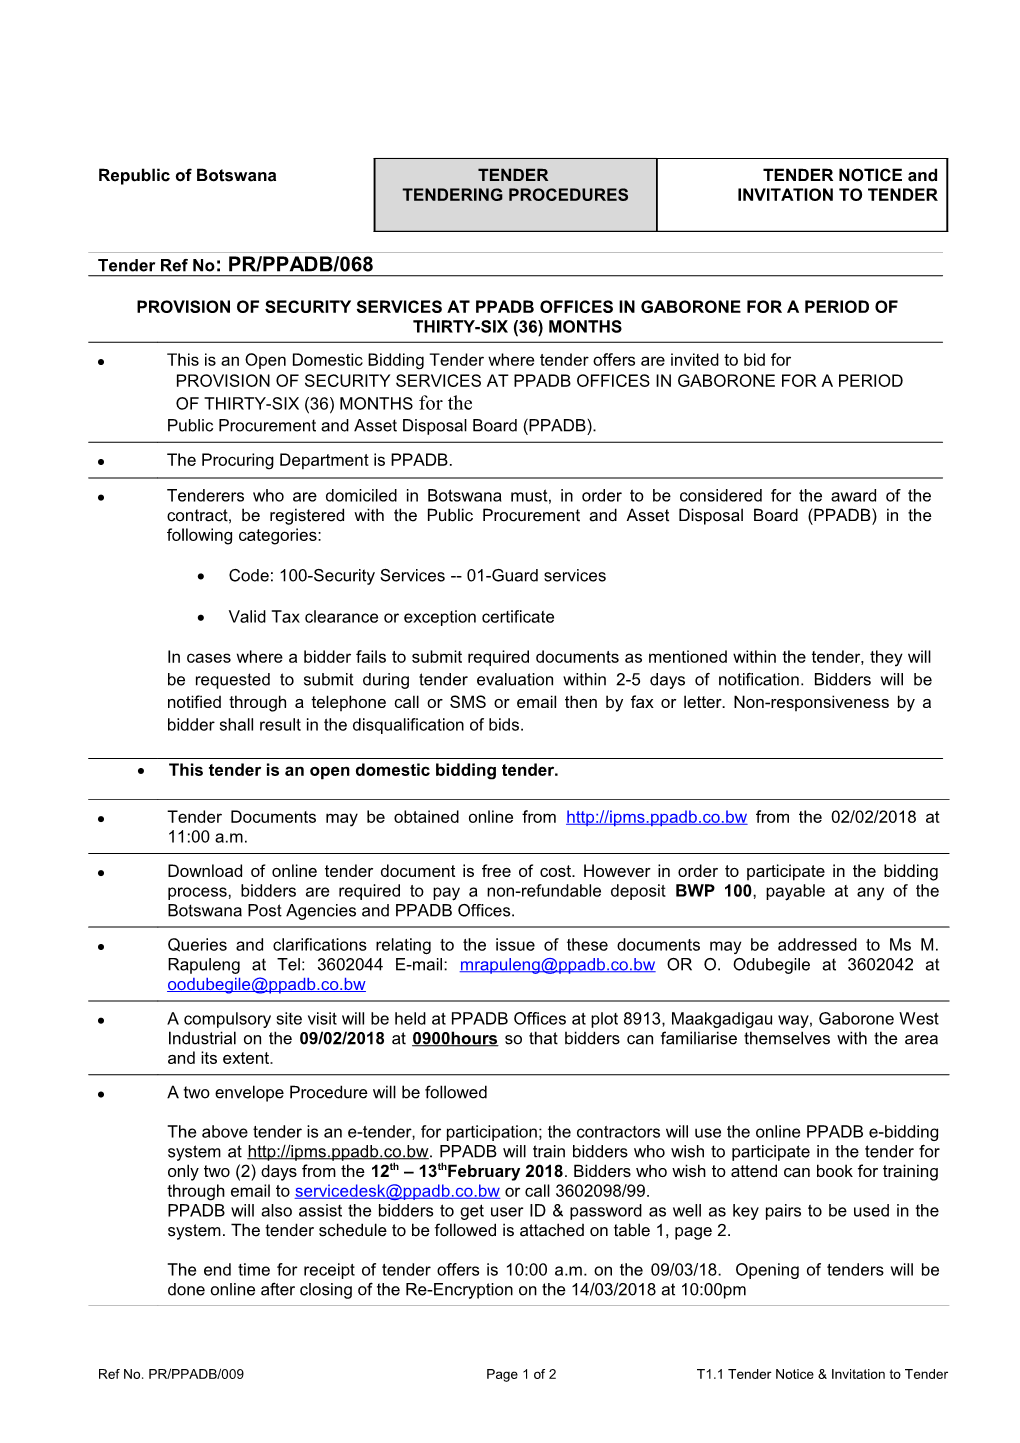 Provision of Security Services at Ppadb Offices in Gaborone for a Period of Thirty Six